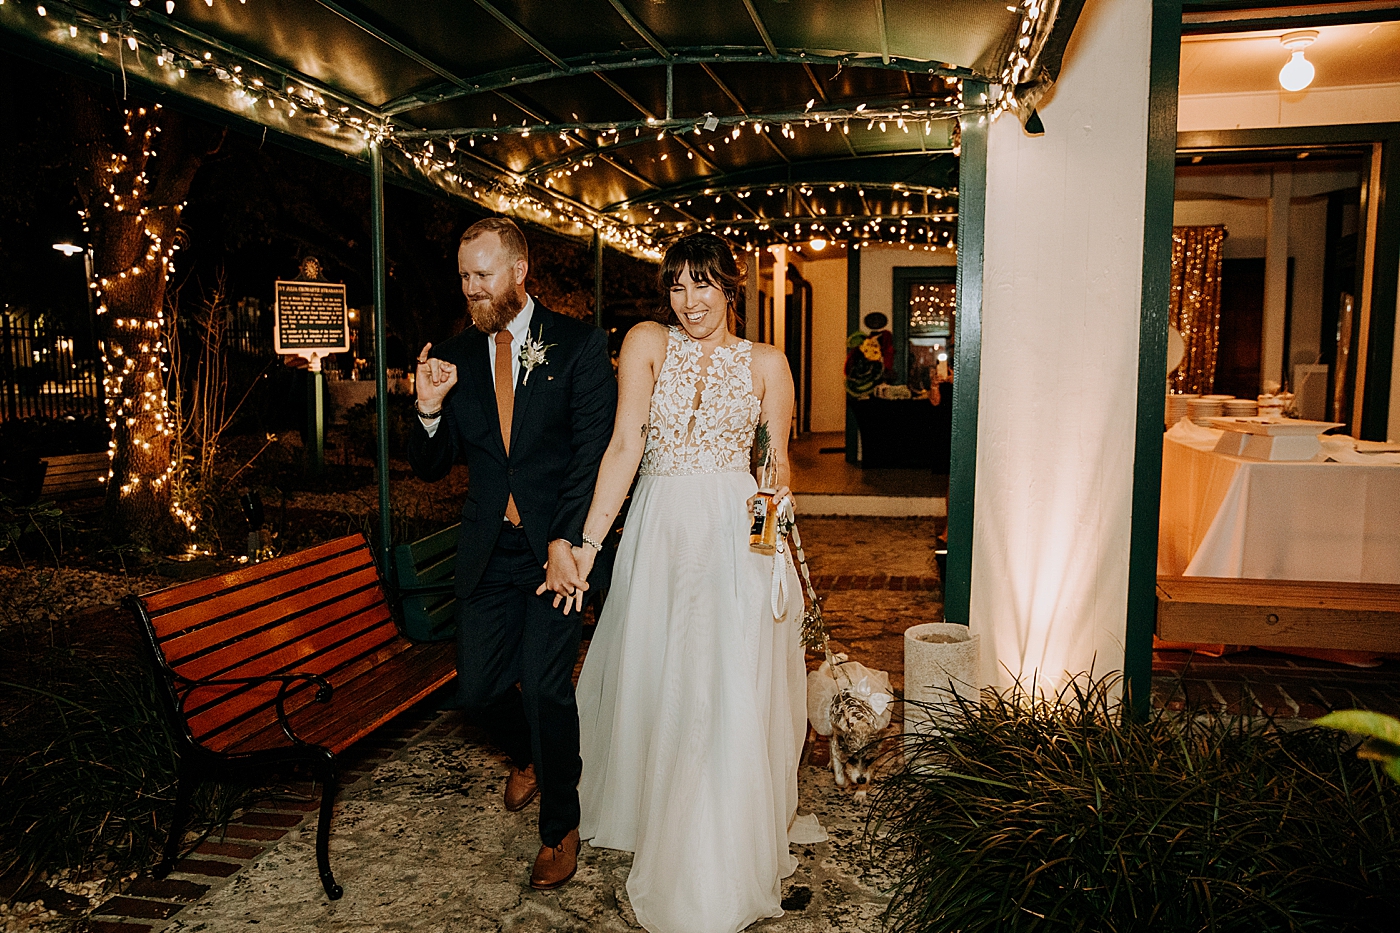 Bride and Groom arriving to the ceremony Historic Stranahan House Wedding Photography captured by South Florida Wedding Photographer Maggie Alvarez Photography